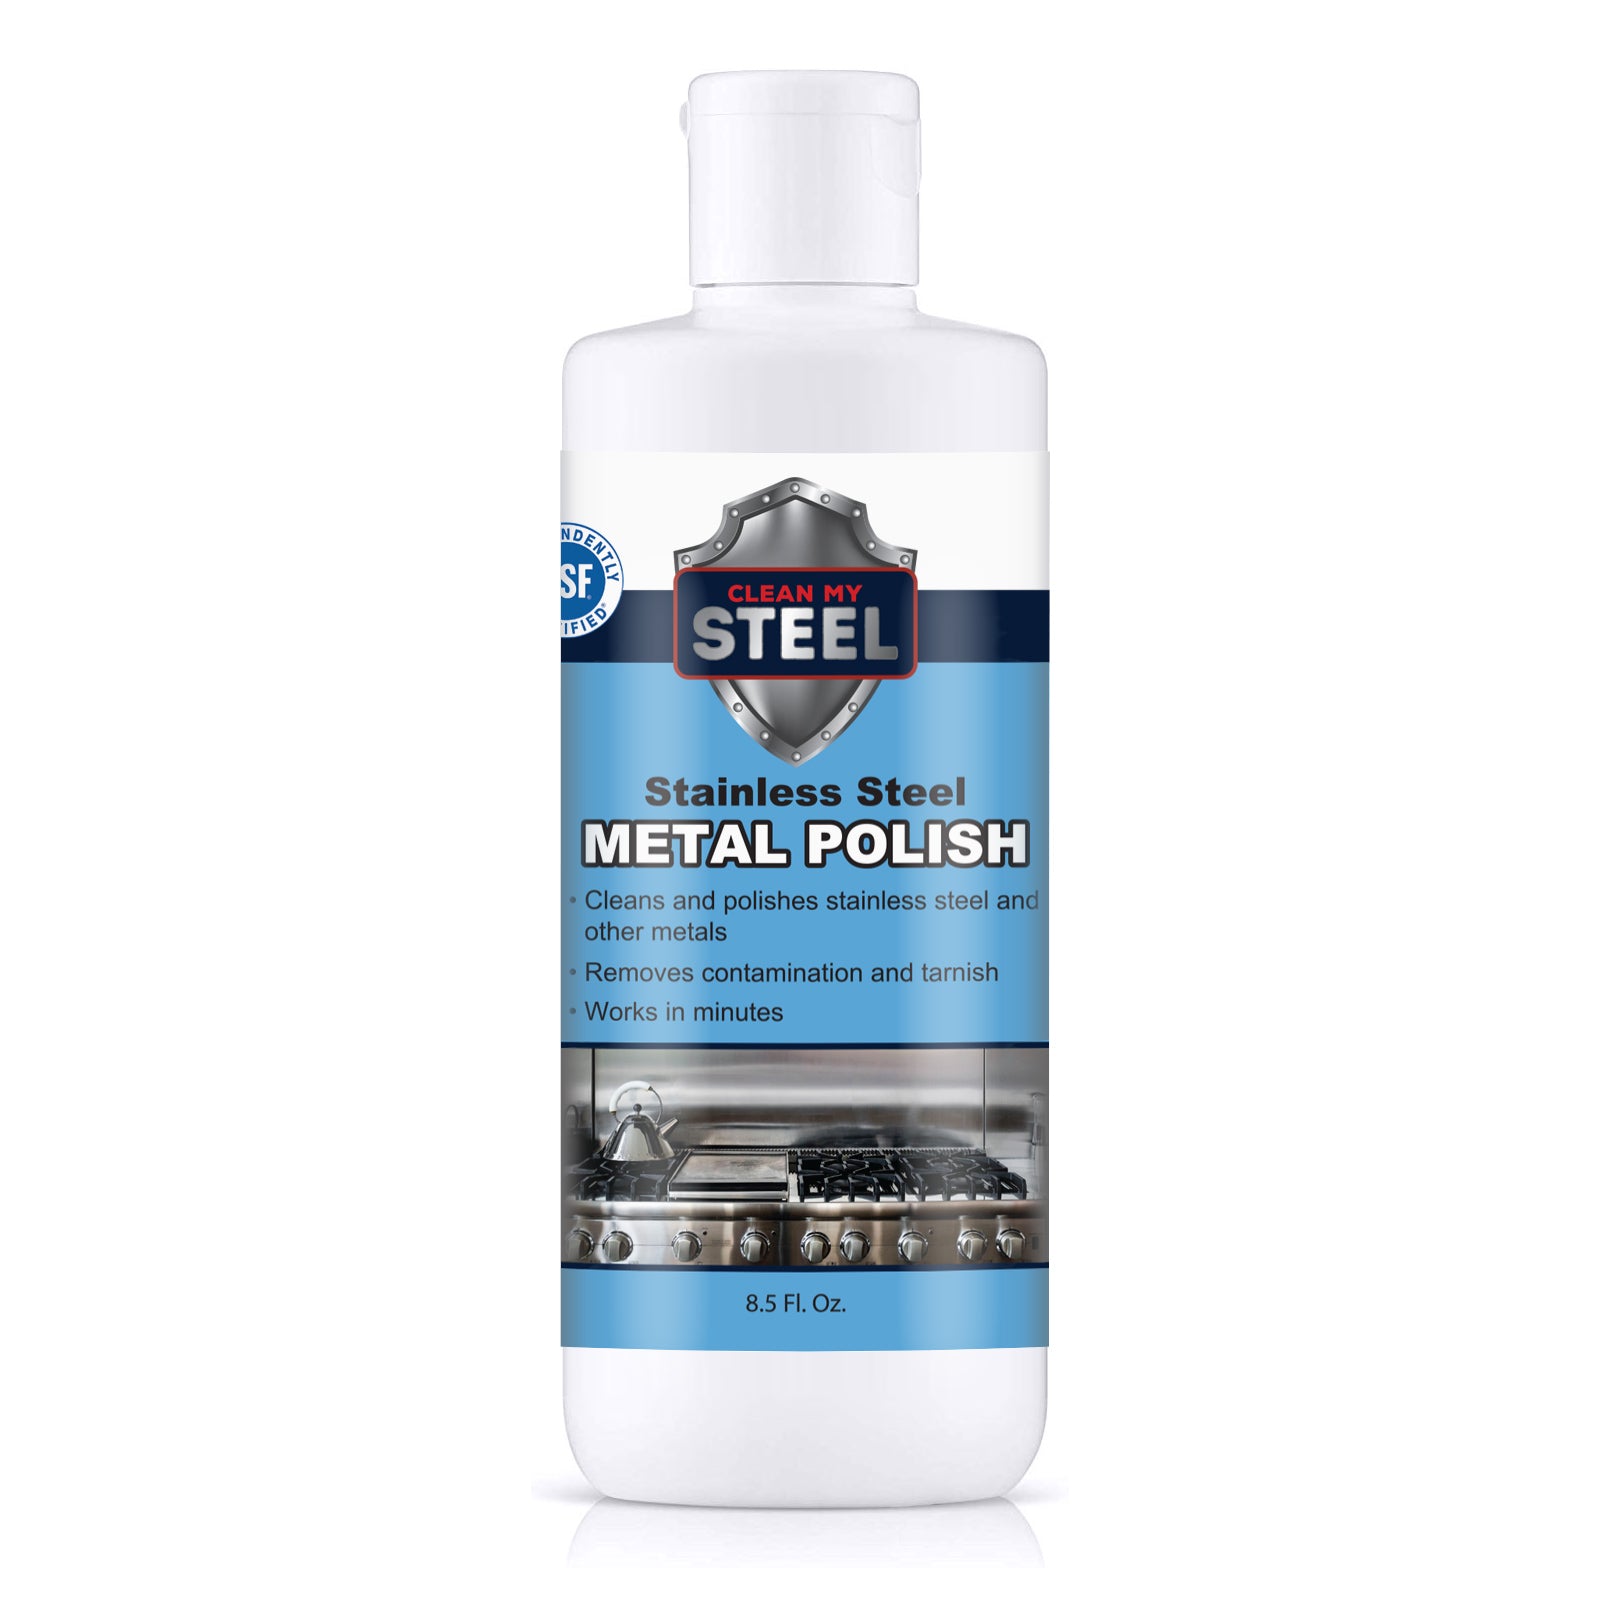 Metal Cleaner and Tarnish Remover - 14 oz.